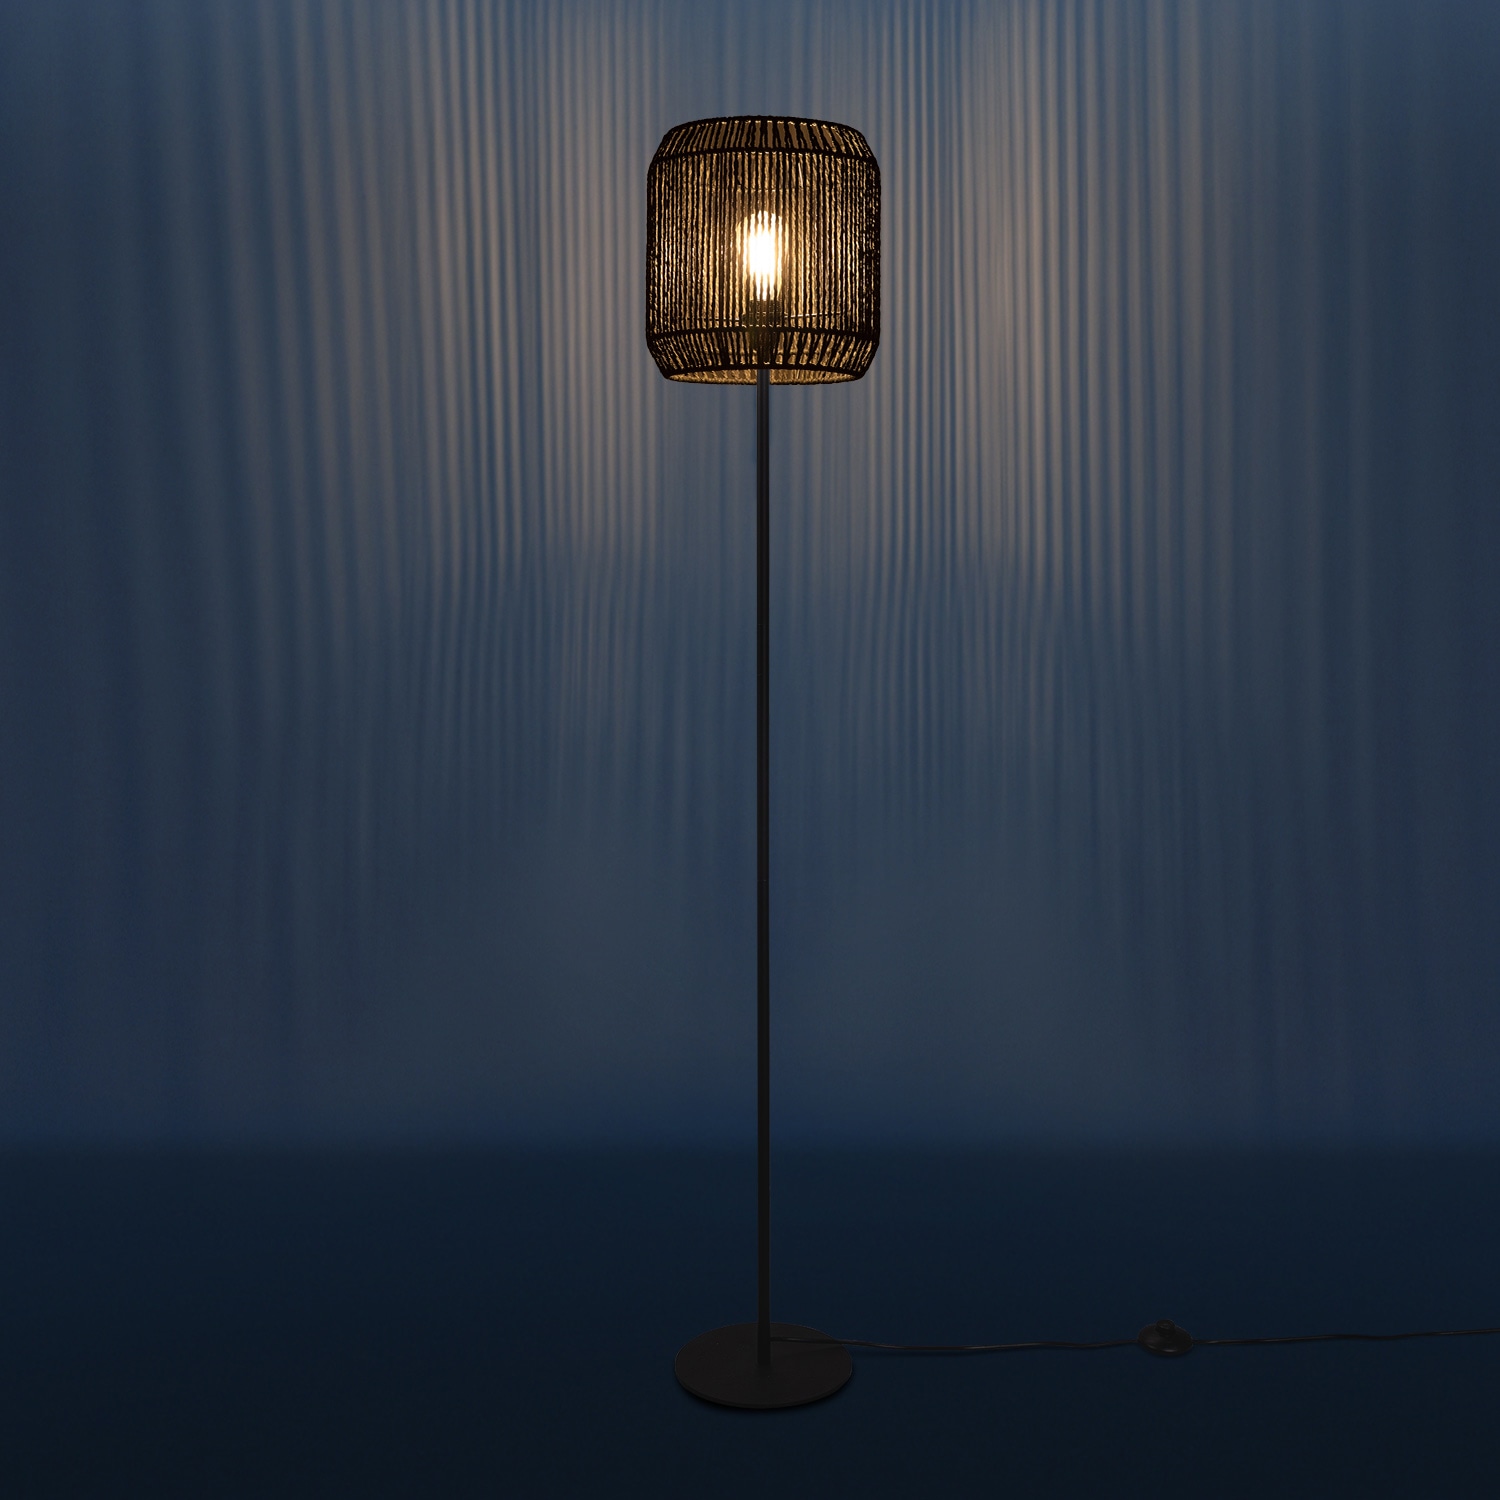 Paco Home Stehlampe »Pedro«, 1 flammig-flammig, moderne LED Lampe in Boho Optik, Wohnzimmer, Schlafzimmer, Fassung E27